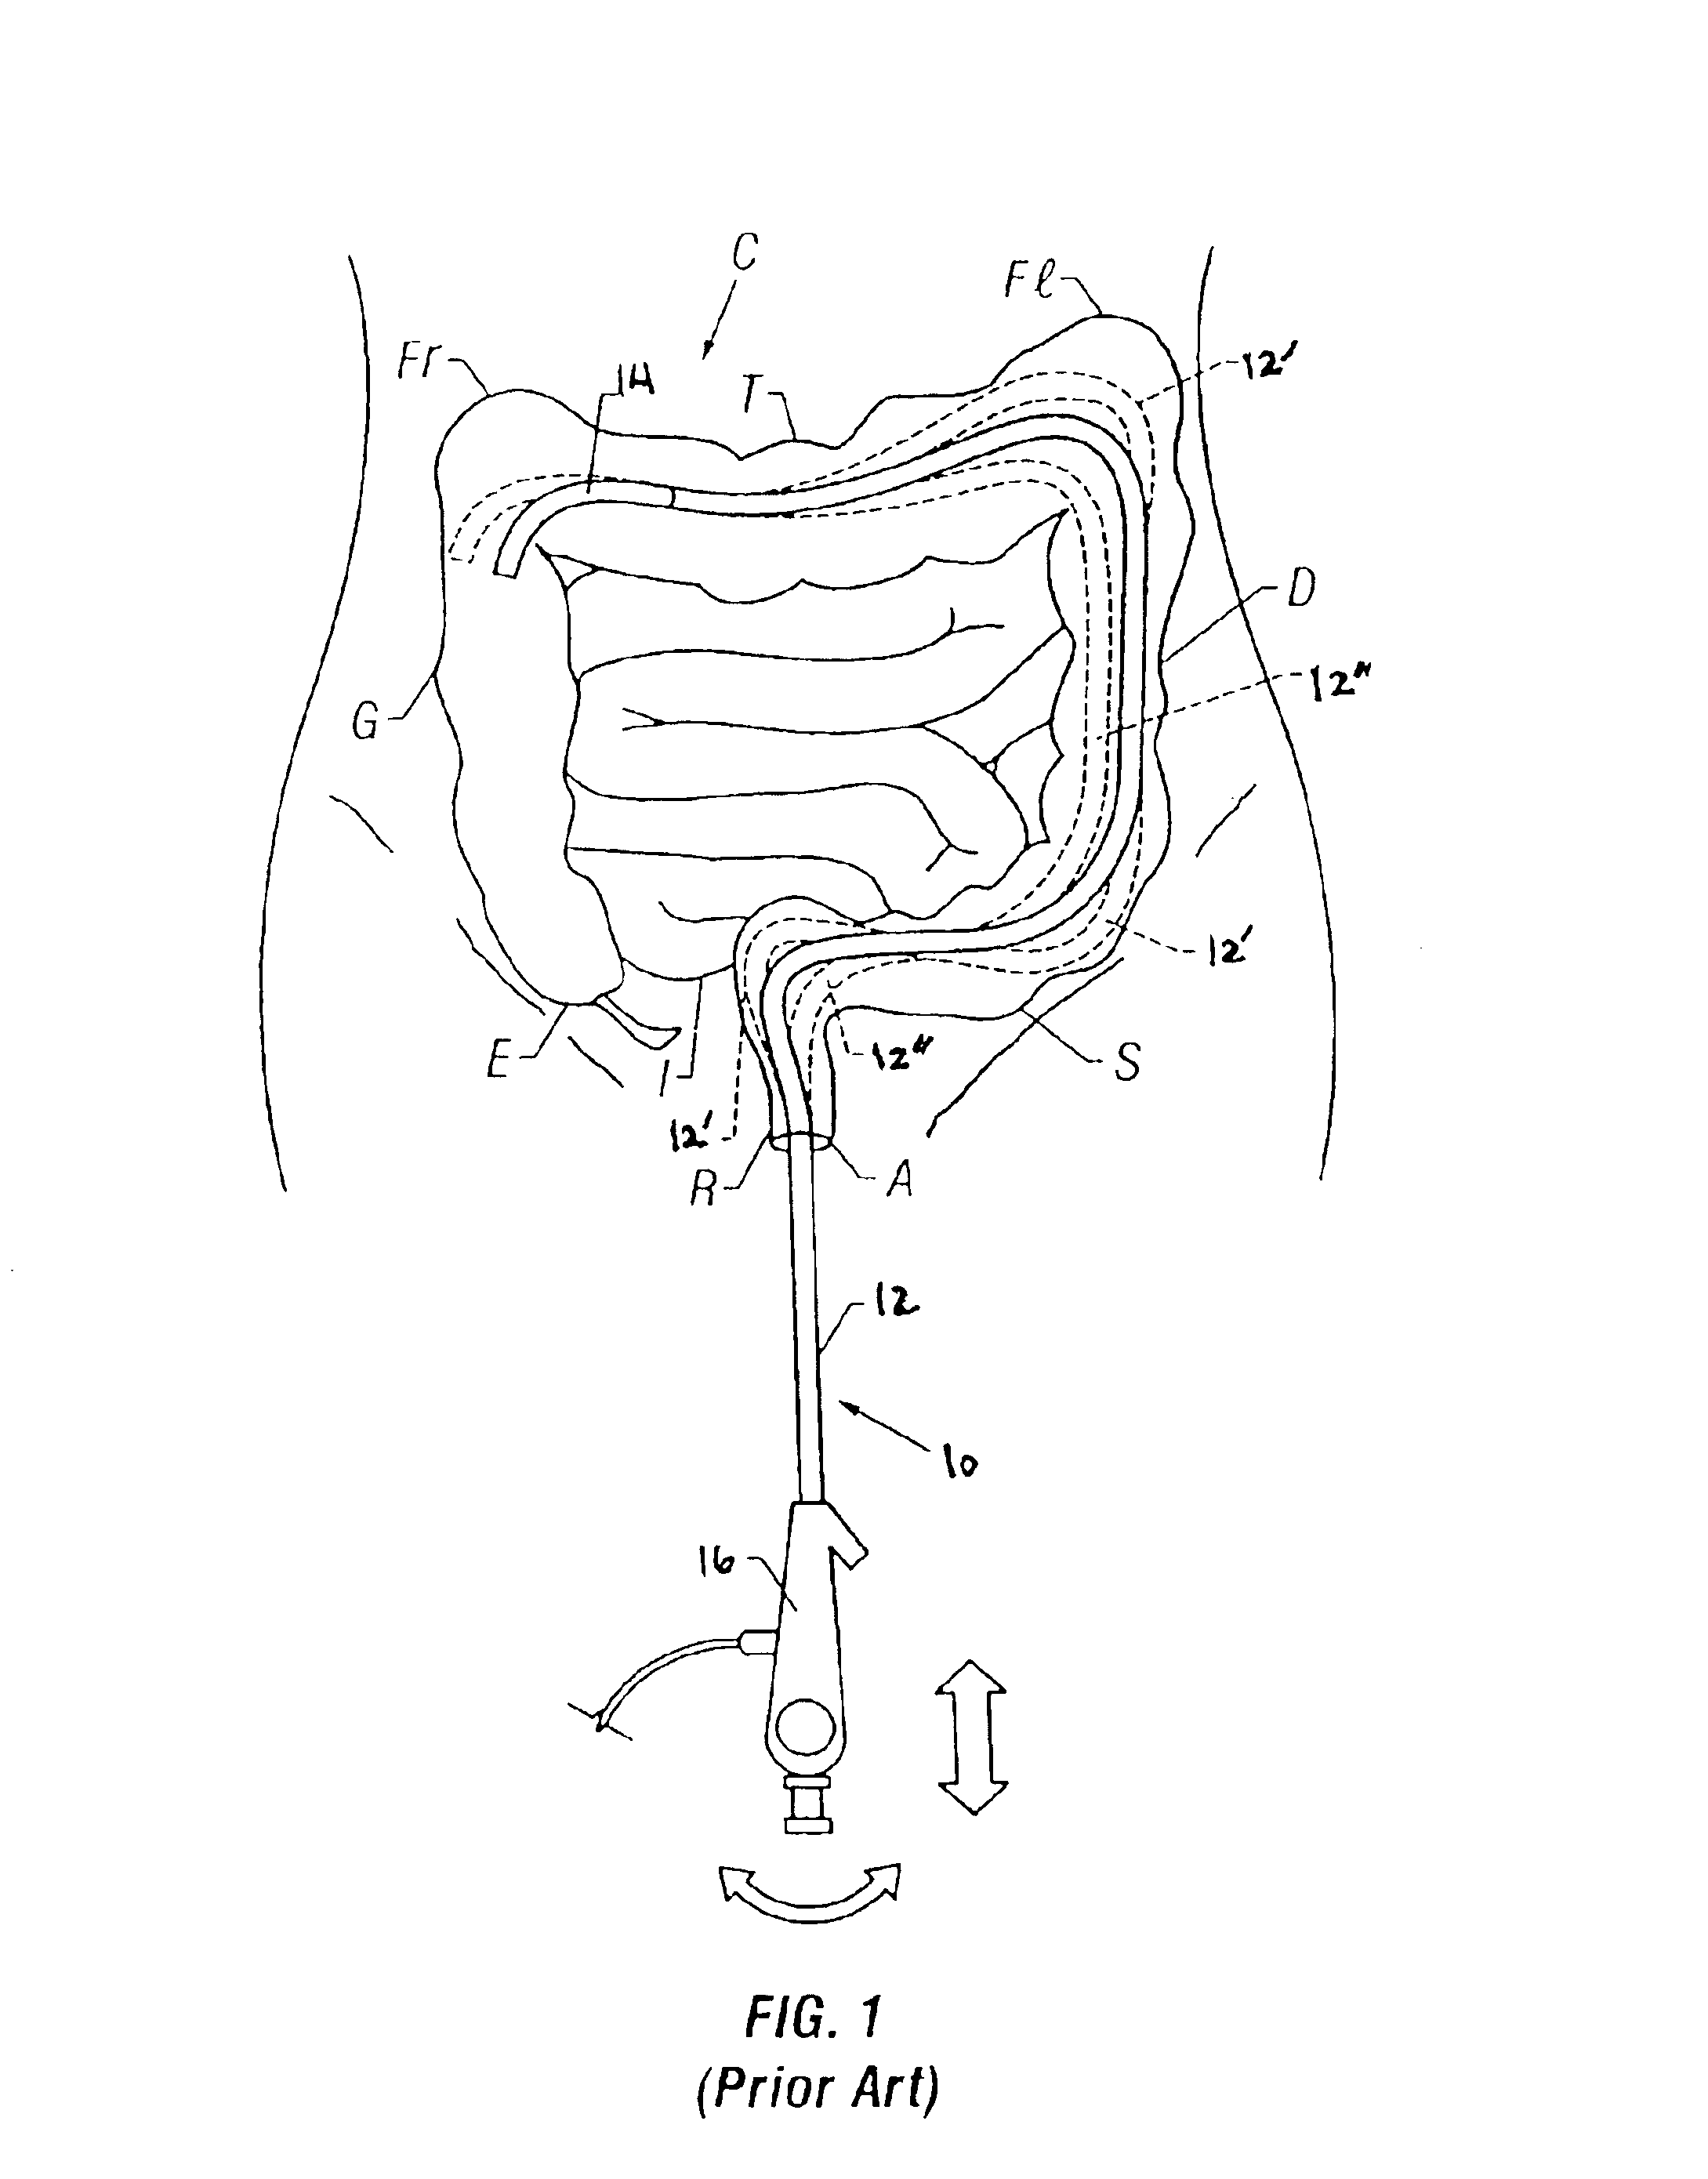 Tendon-driven endoscope and methods of insertion